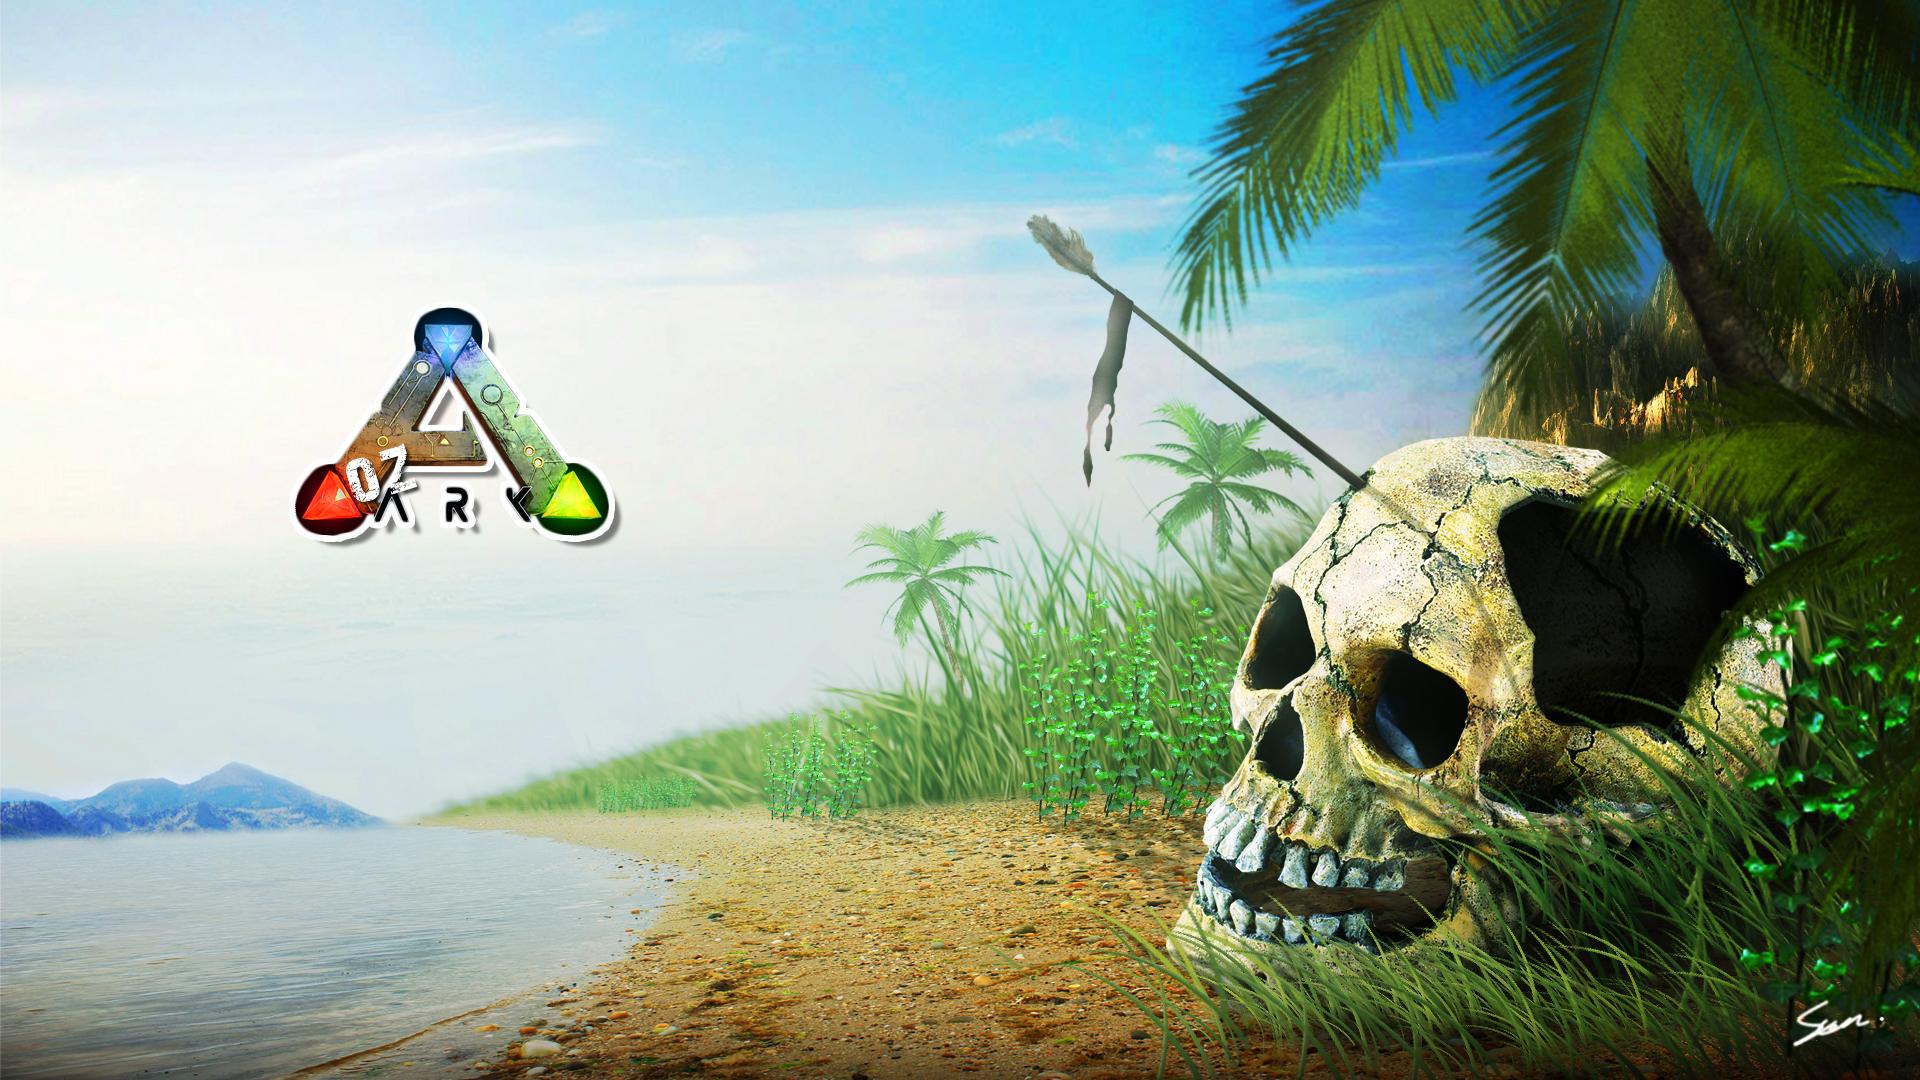 1920 x 1080 · jpeg - ARK: Survival Evolved Wallpapers, Pictures, Images